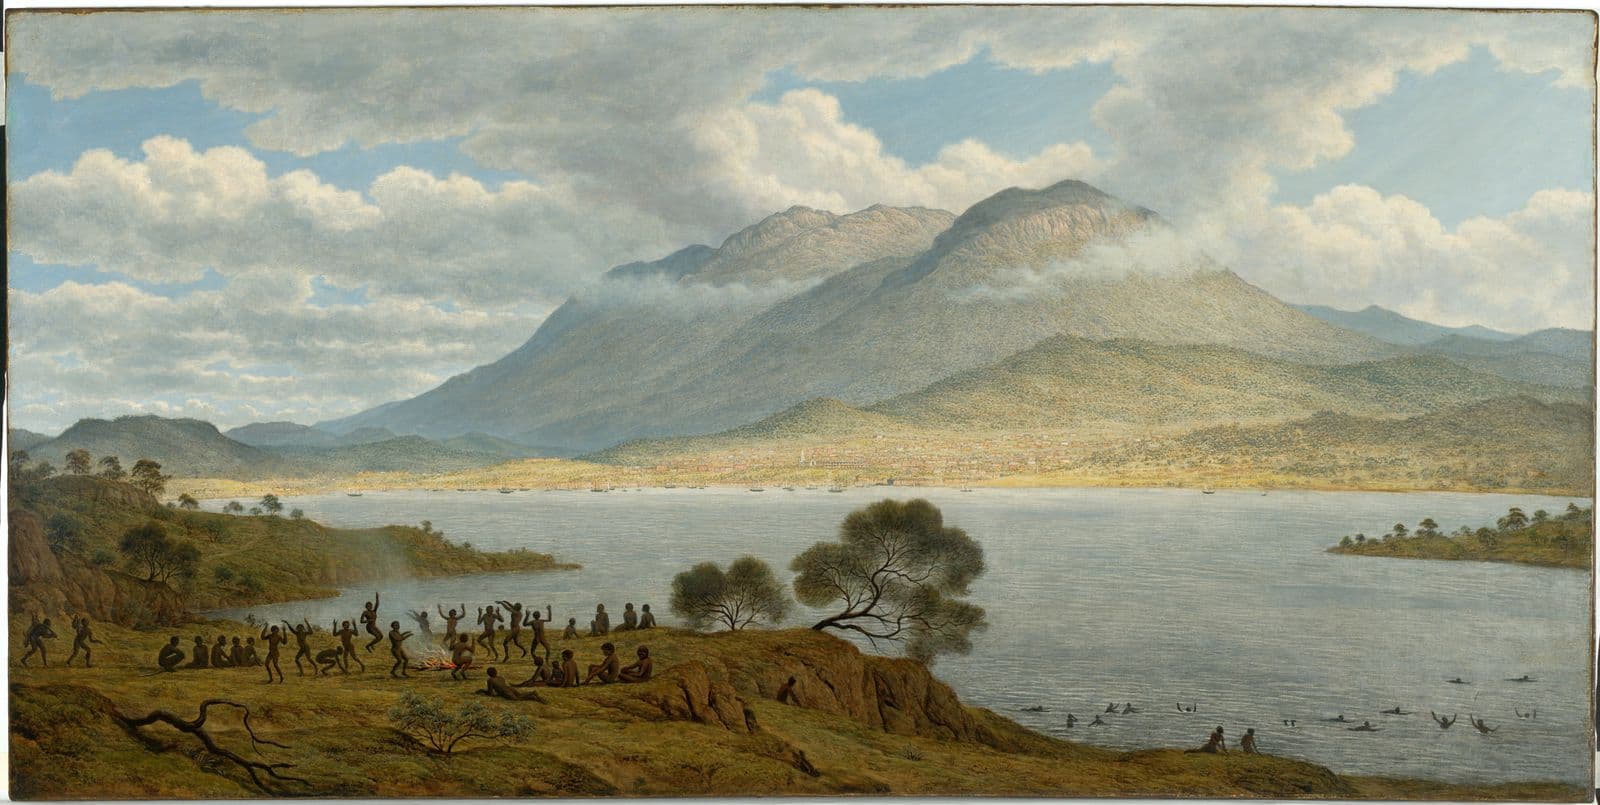 Landscape of large mountain with a body of water at the base, in left foreground a community of indigenous peoples ceremonially dance around a campfire